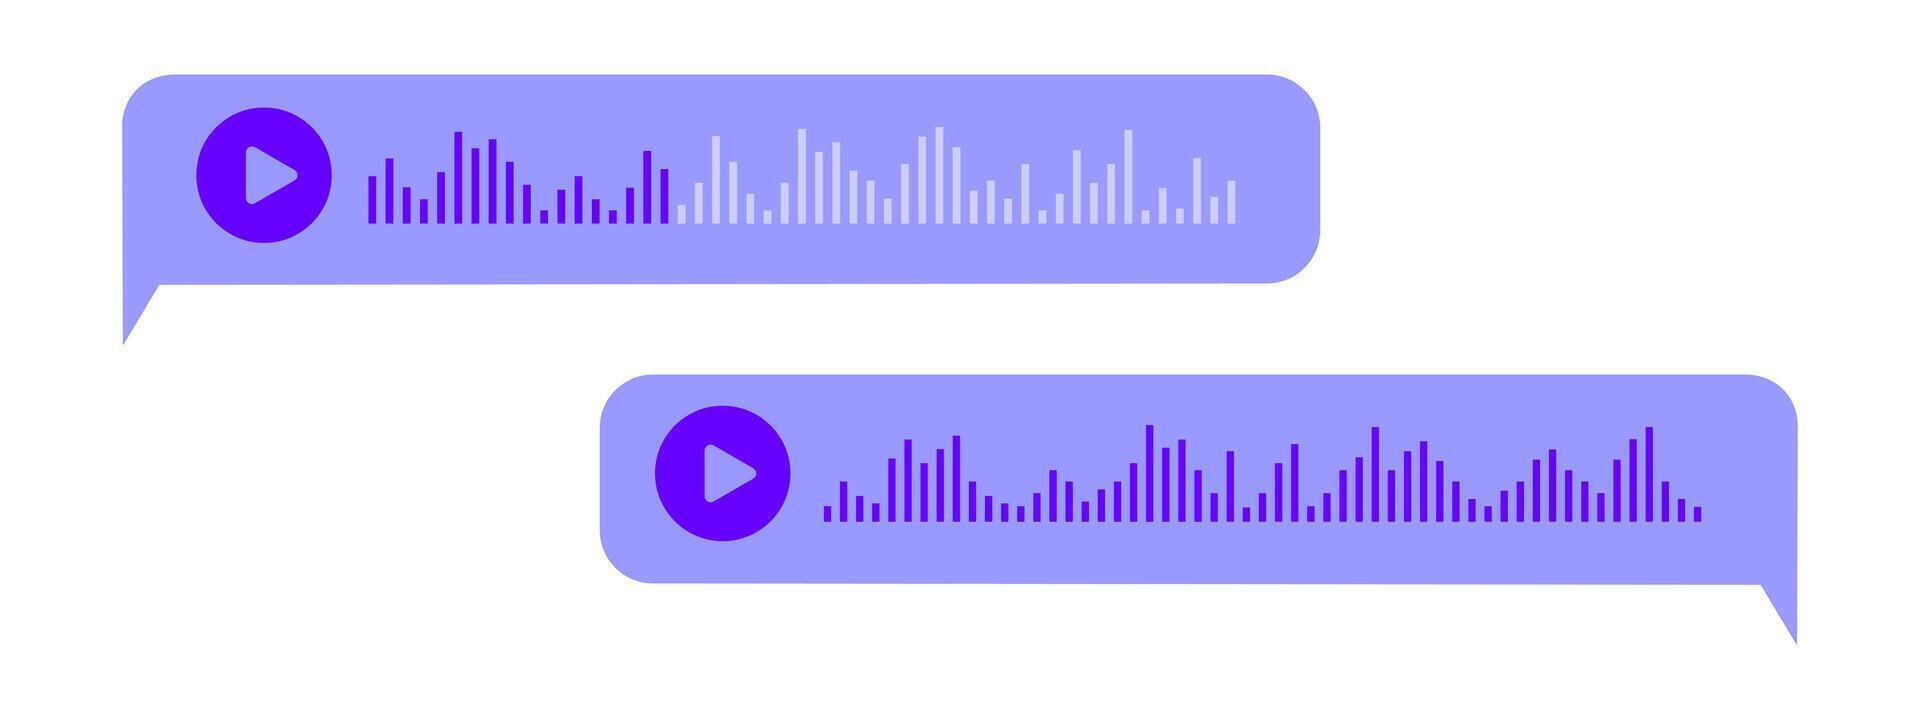 Voice messages in bubble frames. Audio chat elements with speech waves. Online messenger, radio, podcast mobile app elements vector